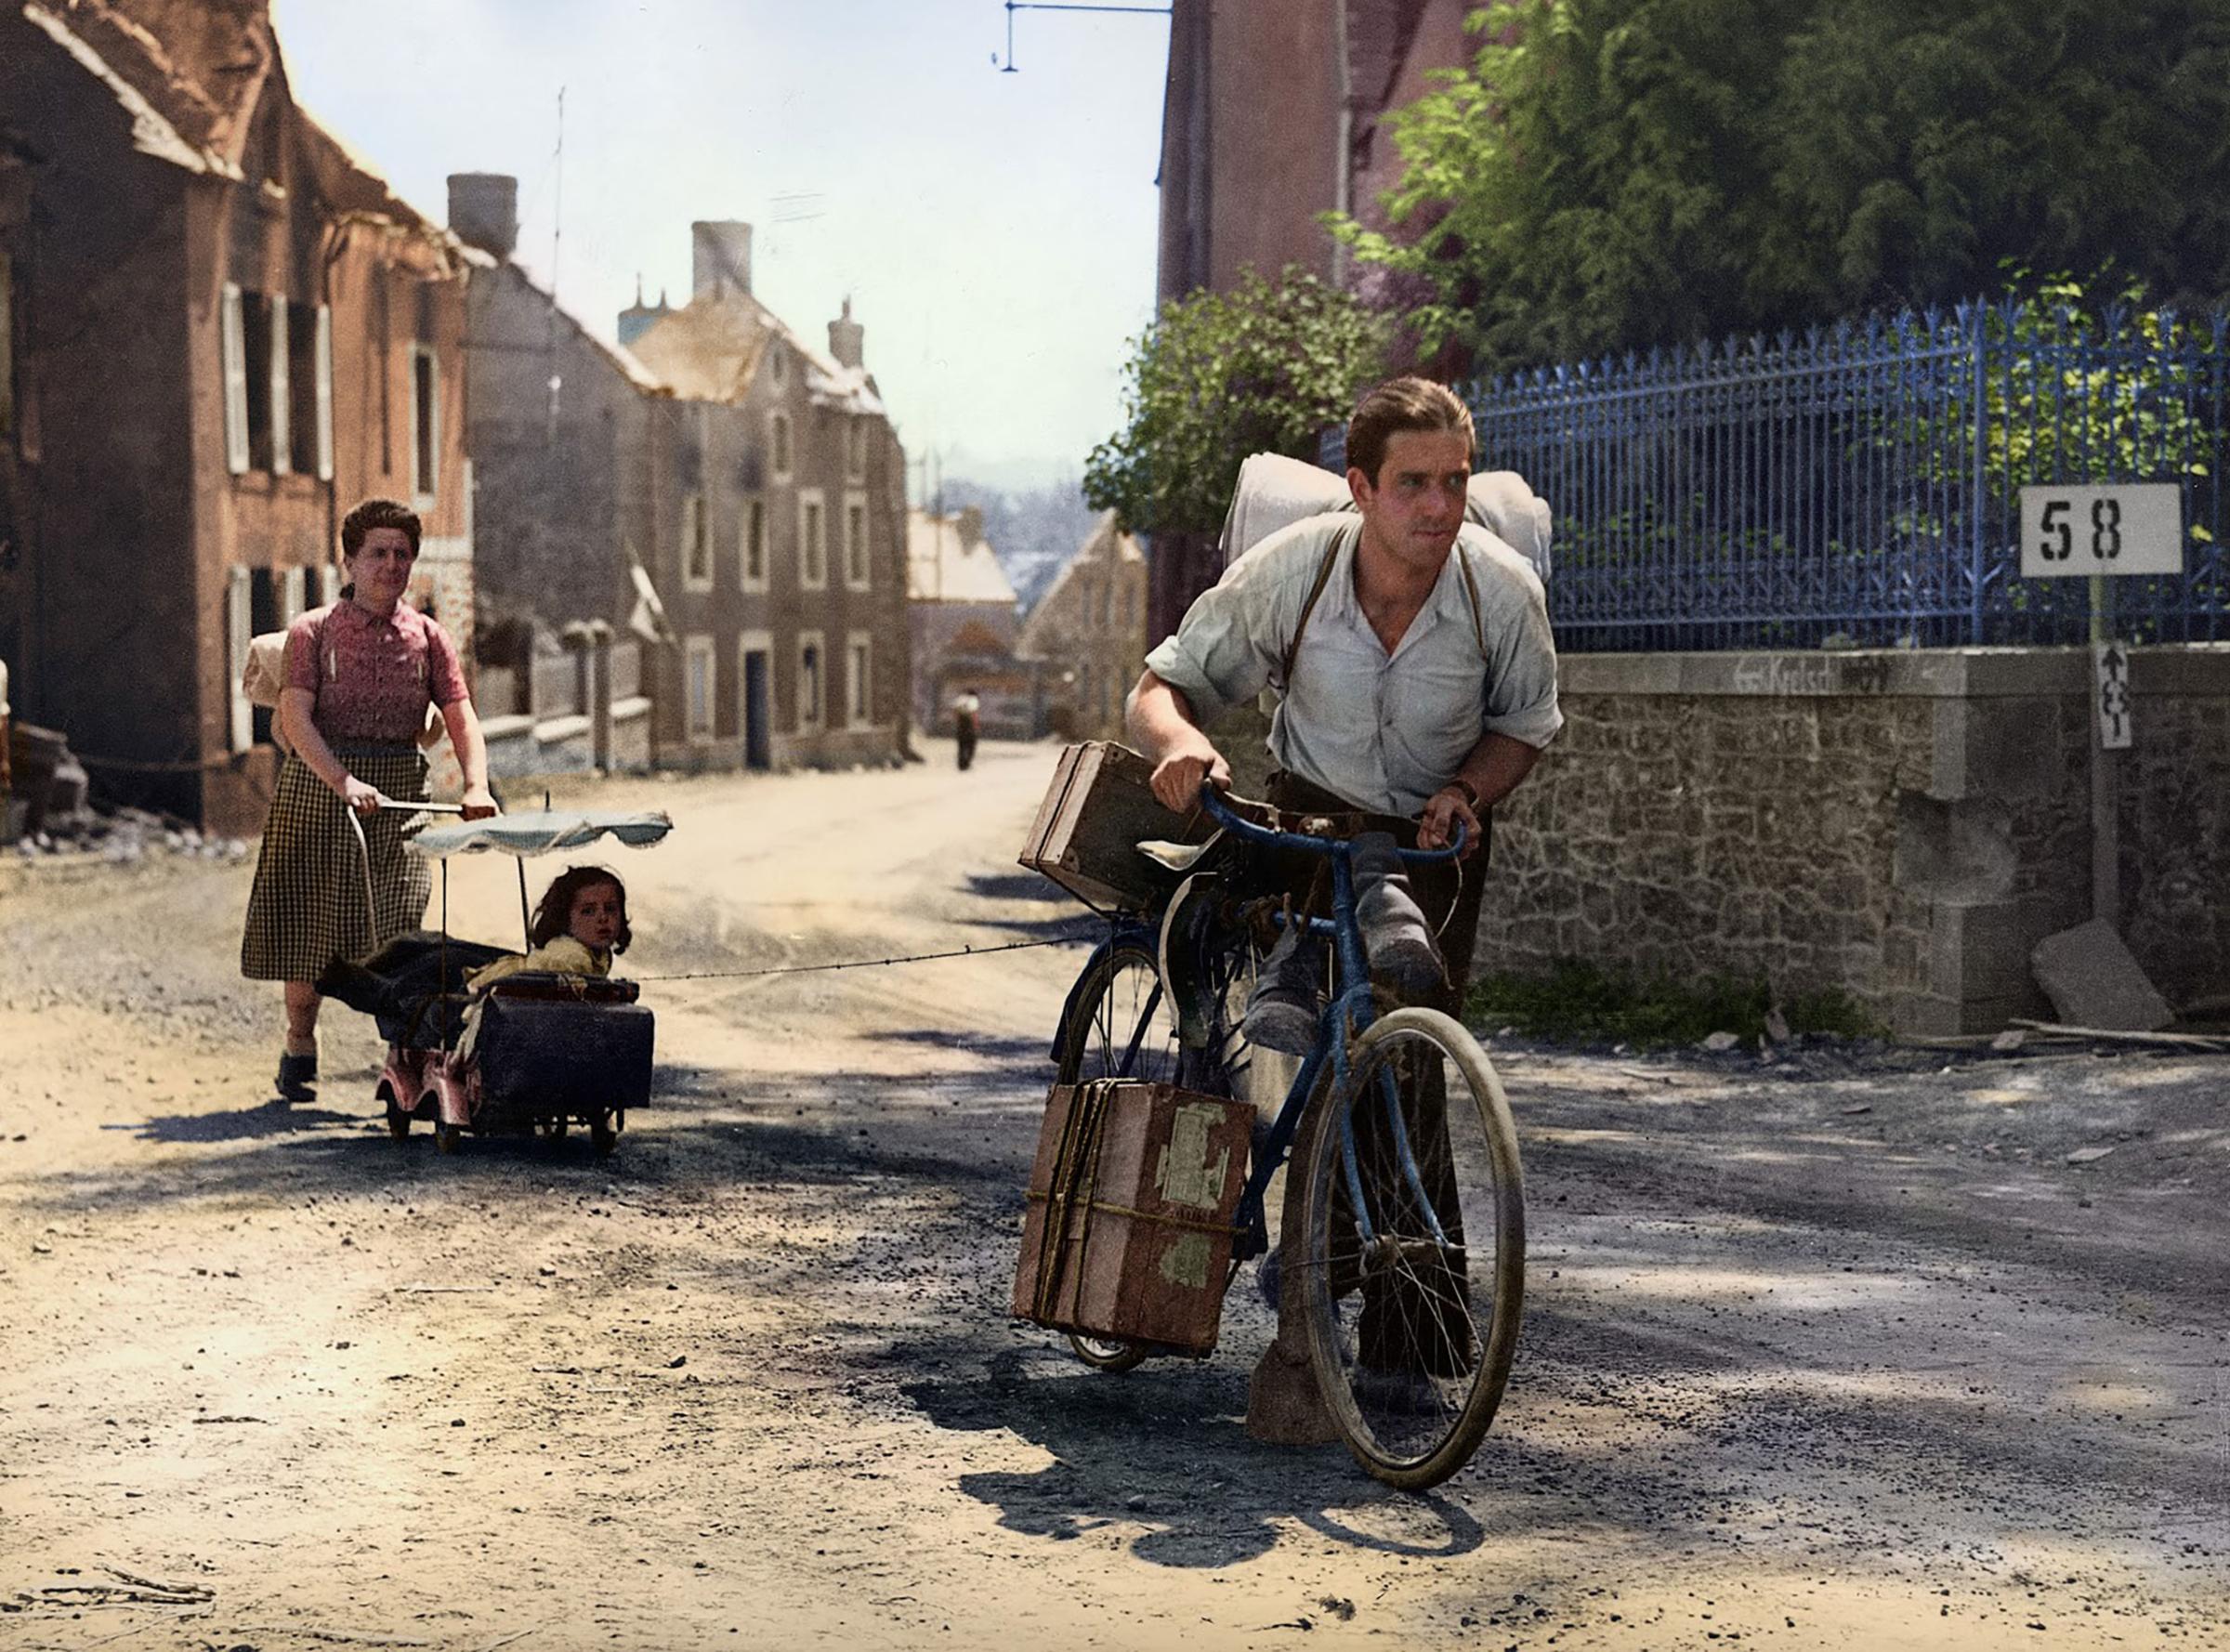 7th August 1944:  A man pulling a refugee's pram, attached by a cord to his bike, up a hill in Roncey, France.  (Photo by Fred Ramage/Keystone/Getty Images)